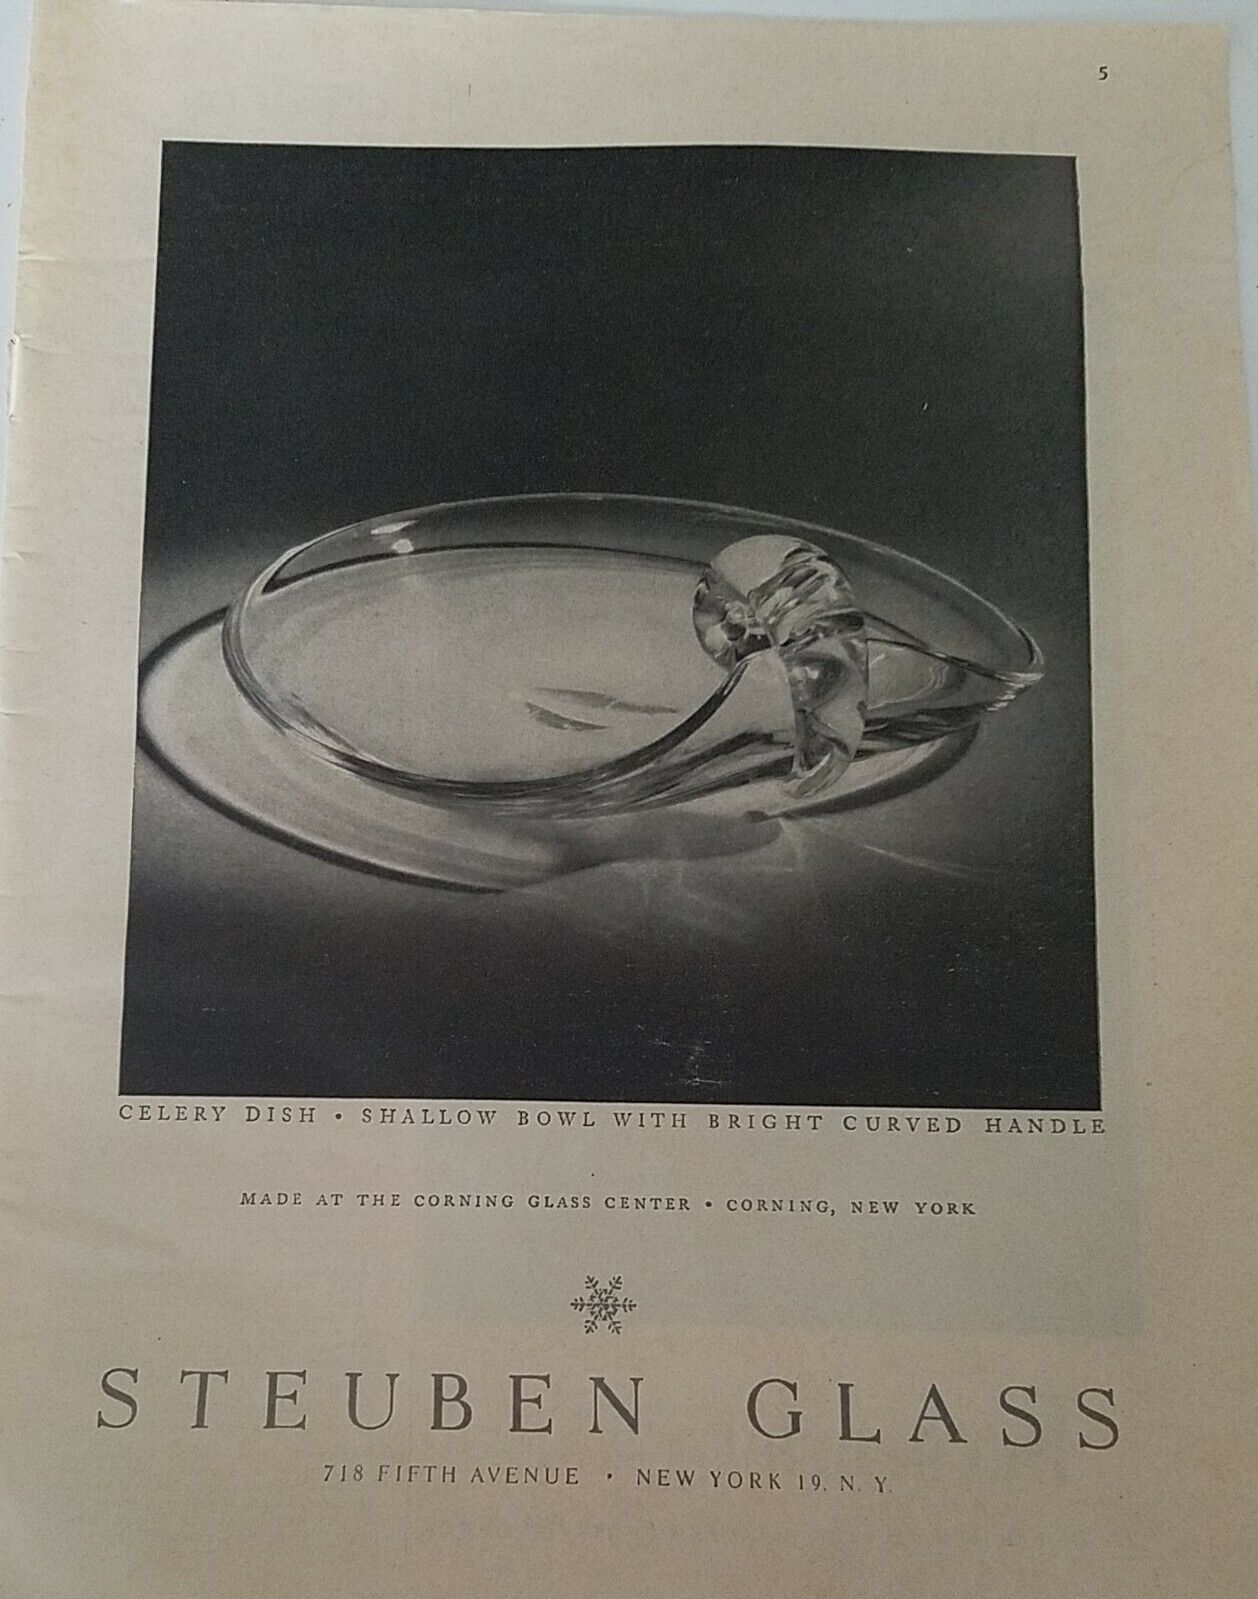 1952 Corning New York Steuben glass celery dish curved handle vintage ad